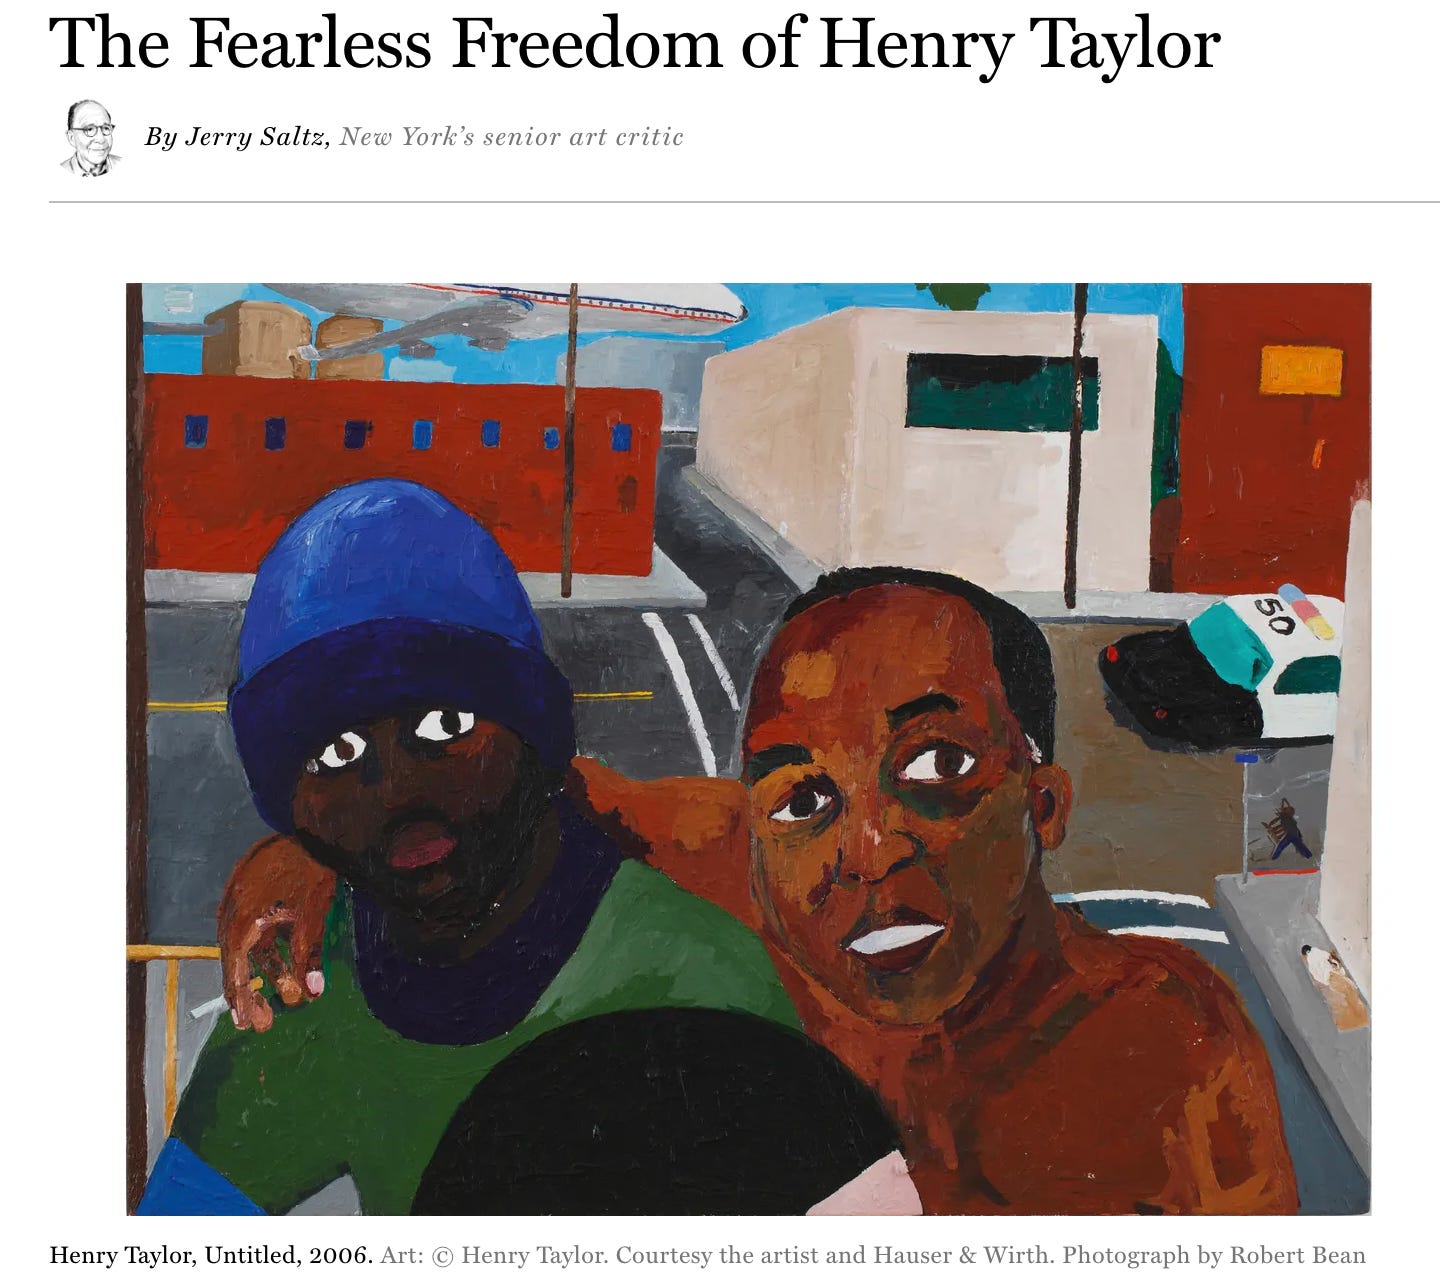 The Fearless Freedom of Henry Taylor